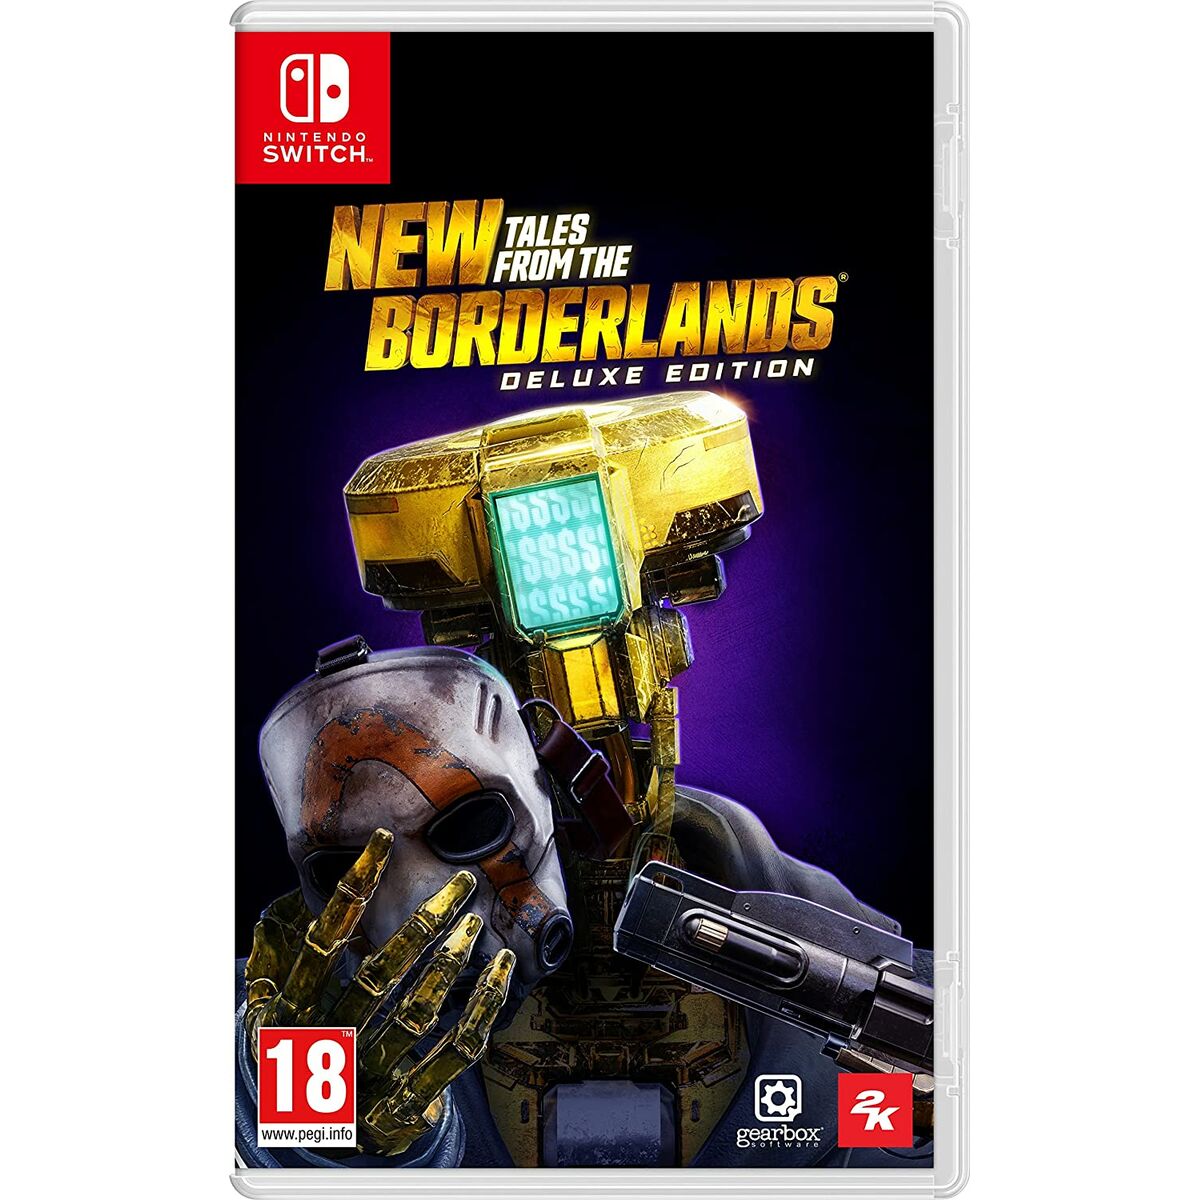 Jeu vidéo pour Switch 2K GAMES New tales from the Borderlands Deluxe Edition